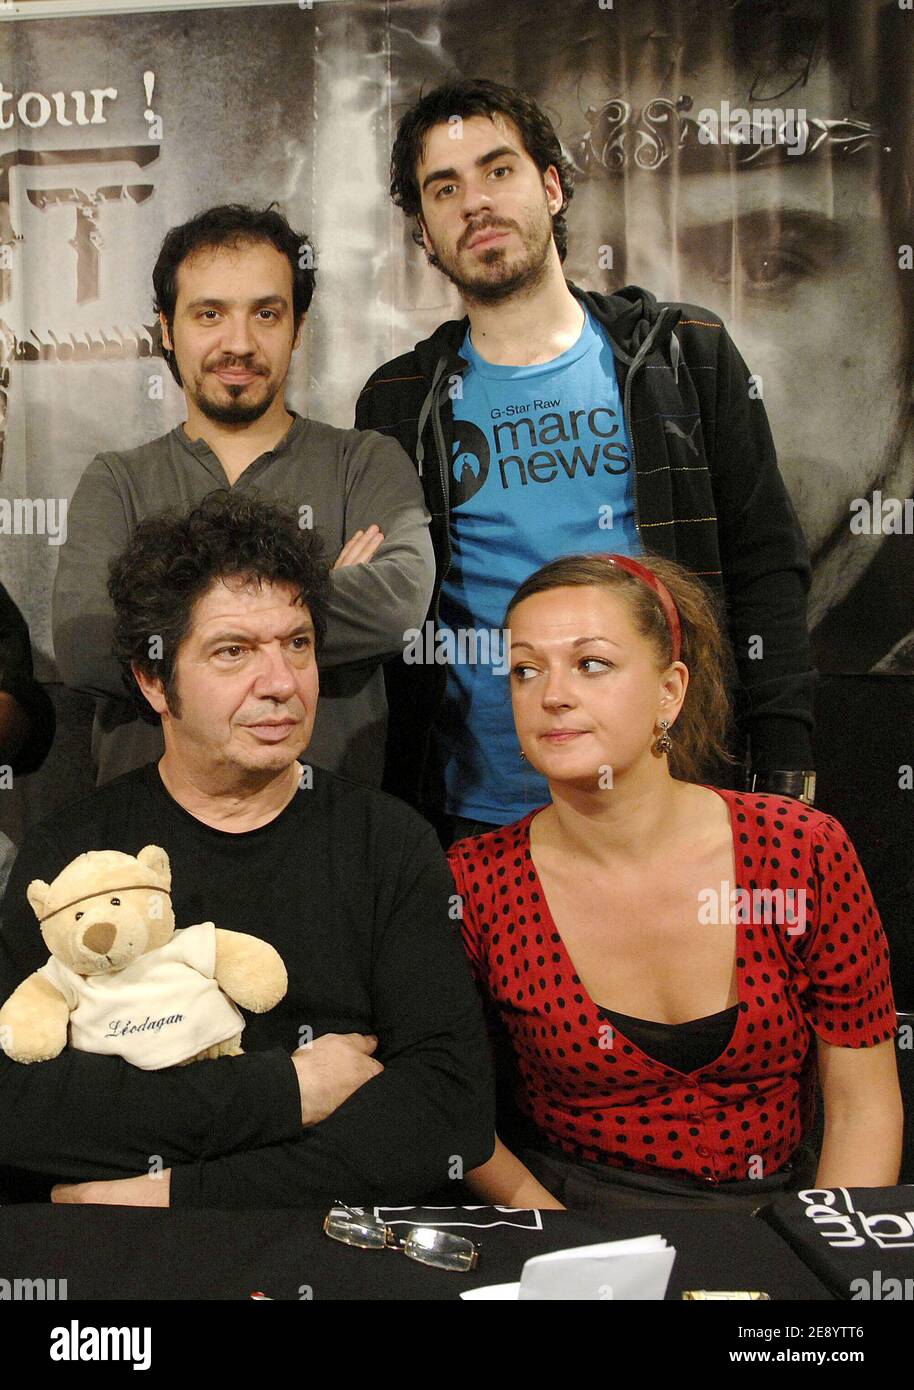 Cast members of French TV channel M6 serie, Kaamelott: from L to R  Alexandre Astier, Simon Astier, (first row) Lionnel Astier and Anne  Girouard during a DVD signing at Saint-Lazare FNAC store